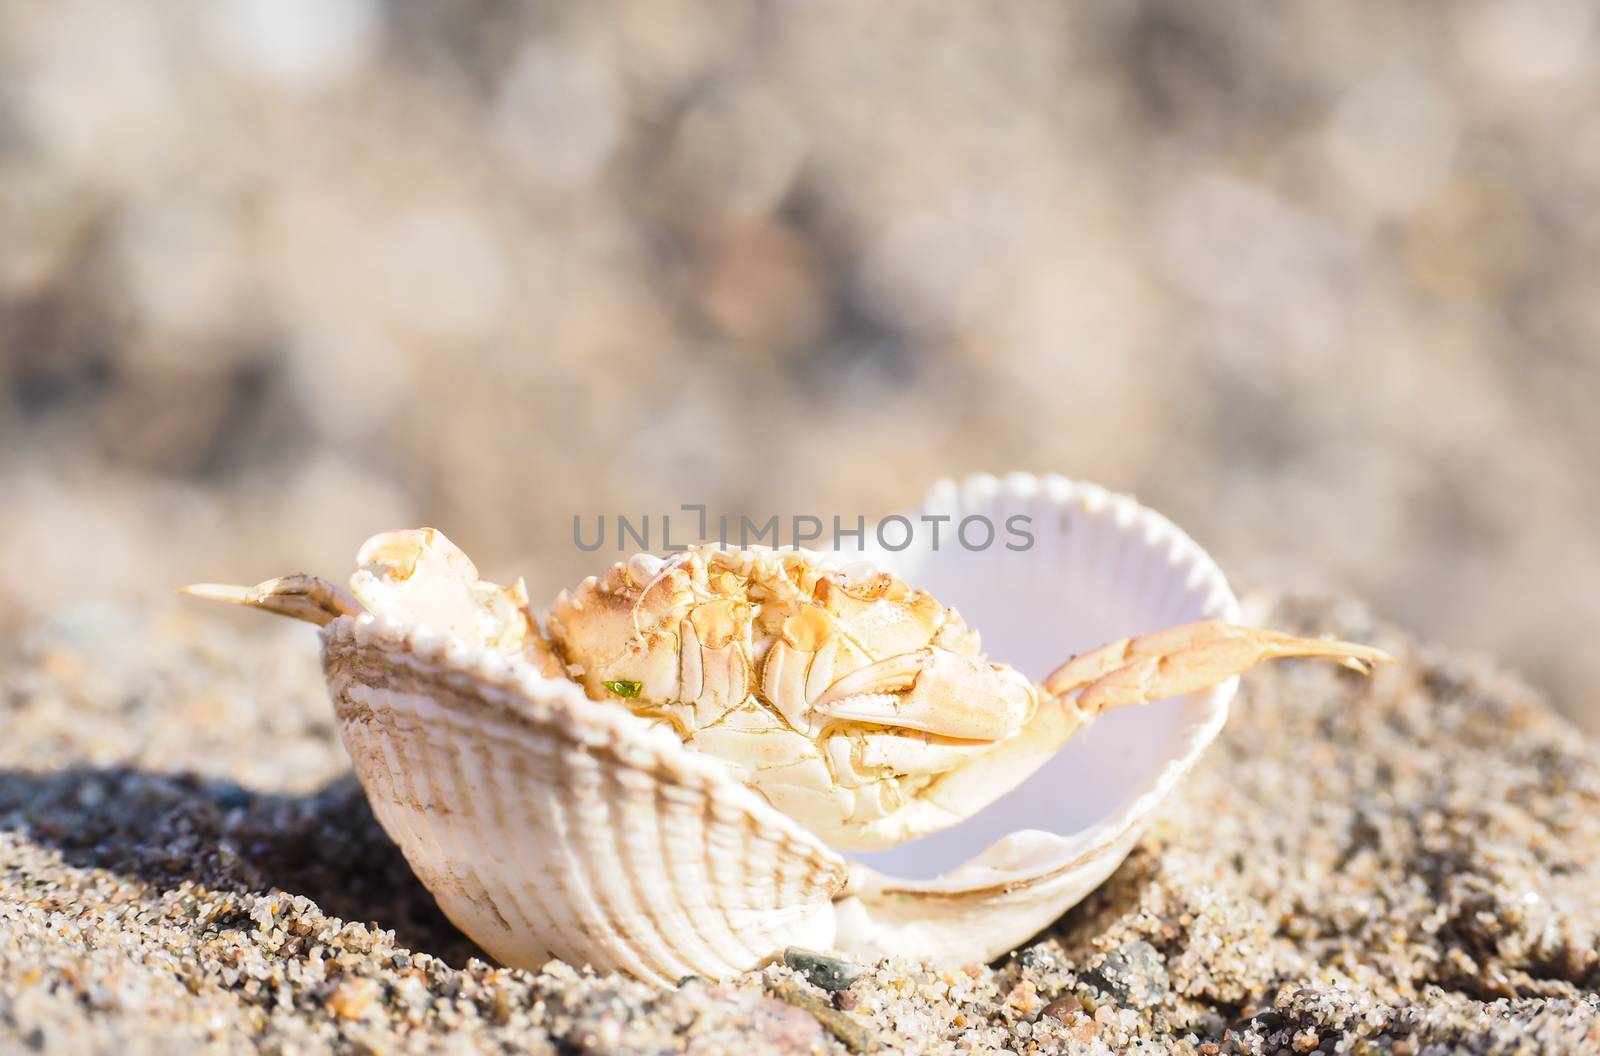 Closeup of a crab hiding in a empty white clam in sand by Arvebettum